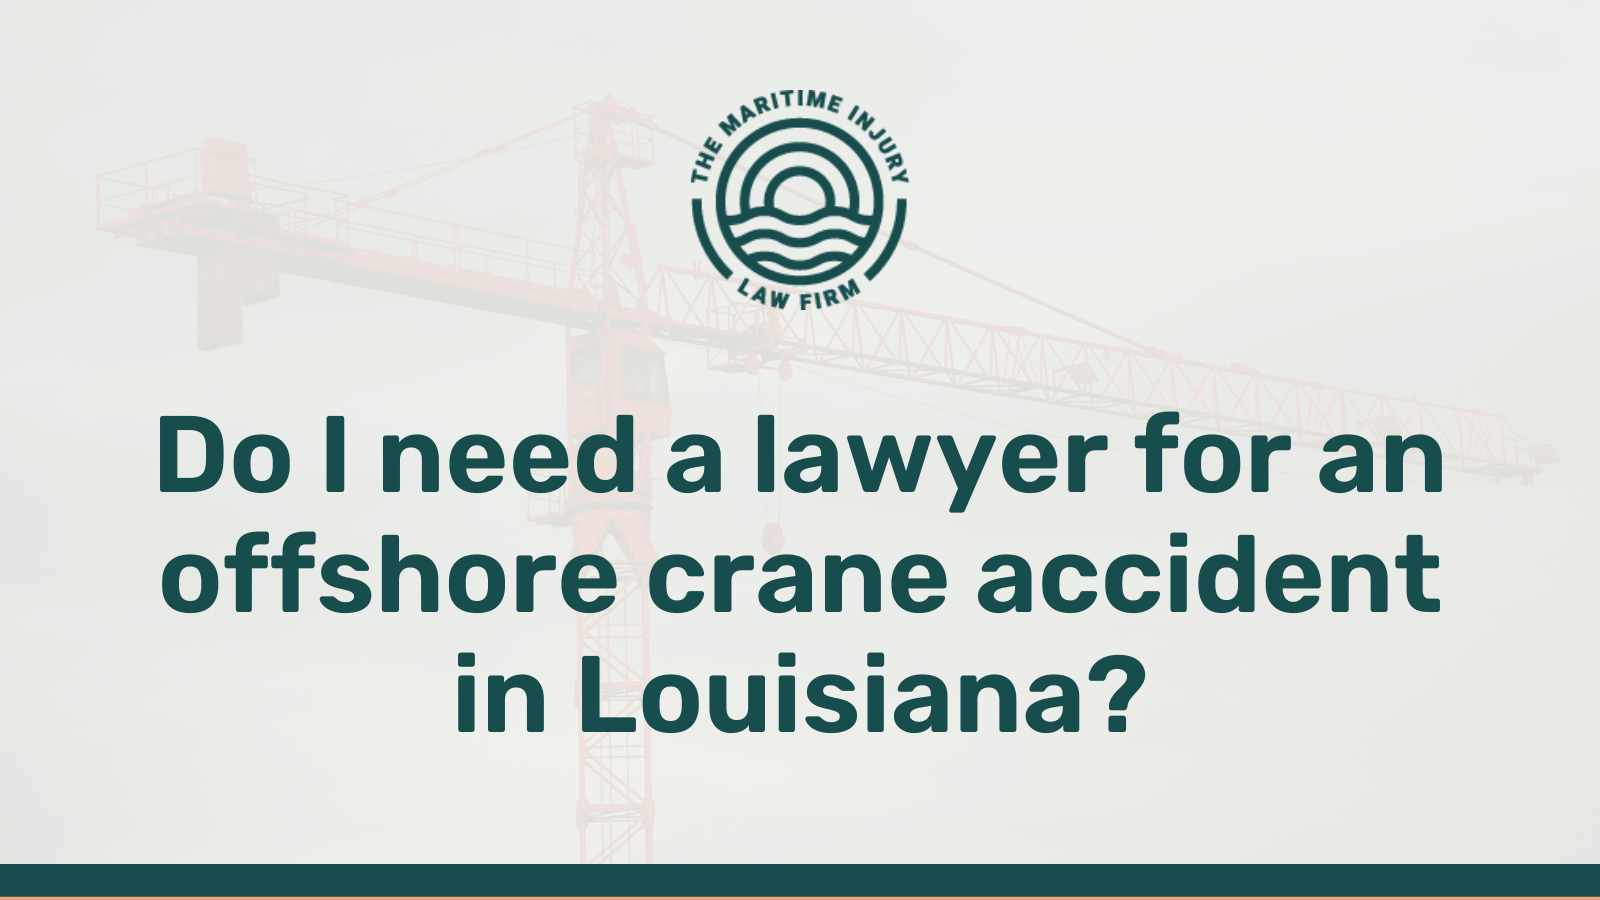 Do I need a lawyer for an offshore crane accident in Louisiana - maritime injury law firm - George Vourvoulias